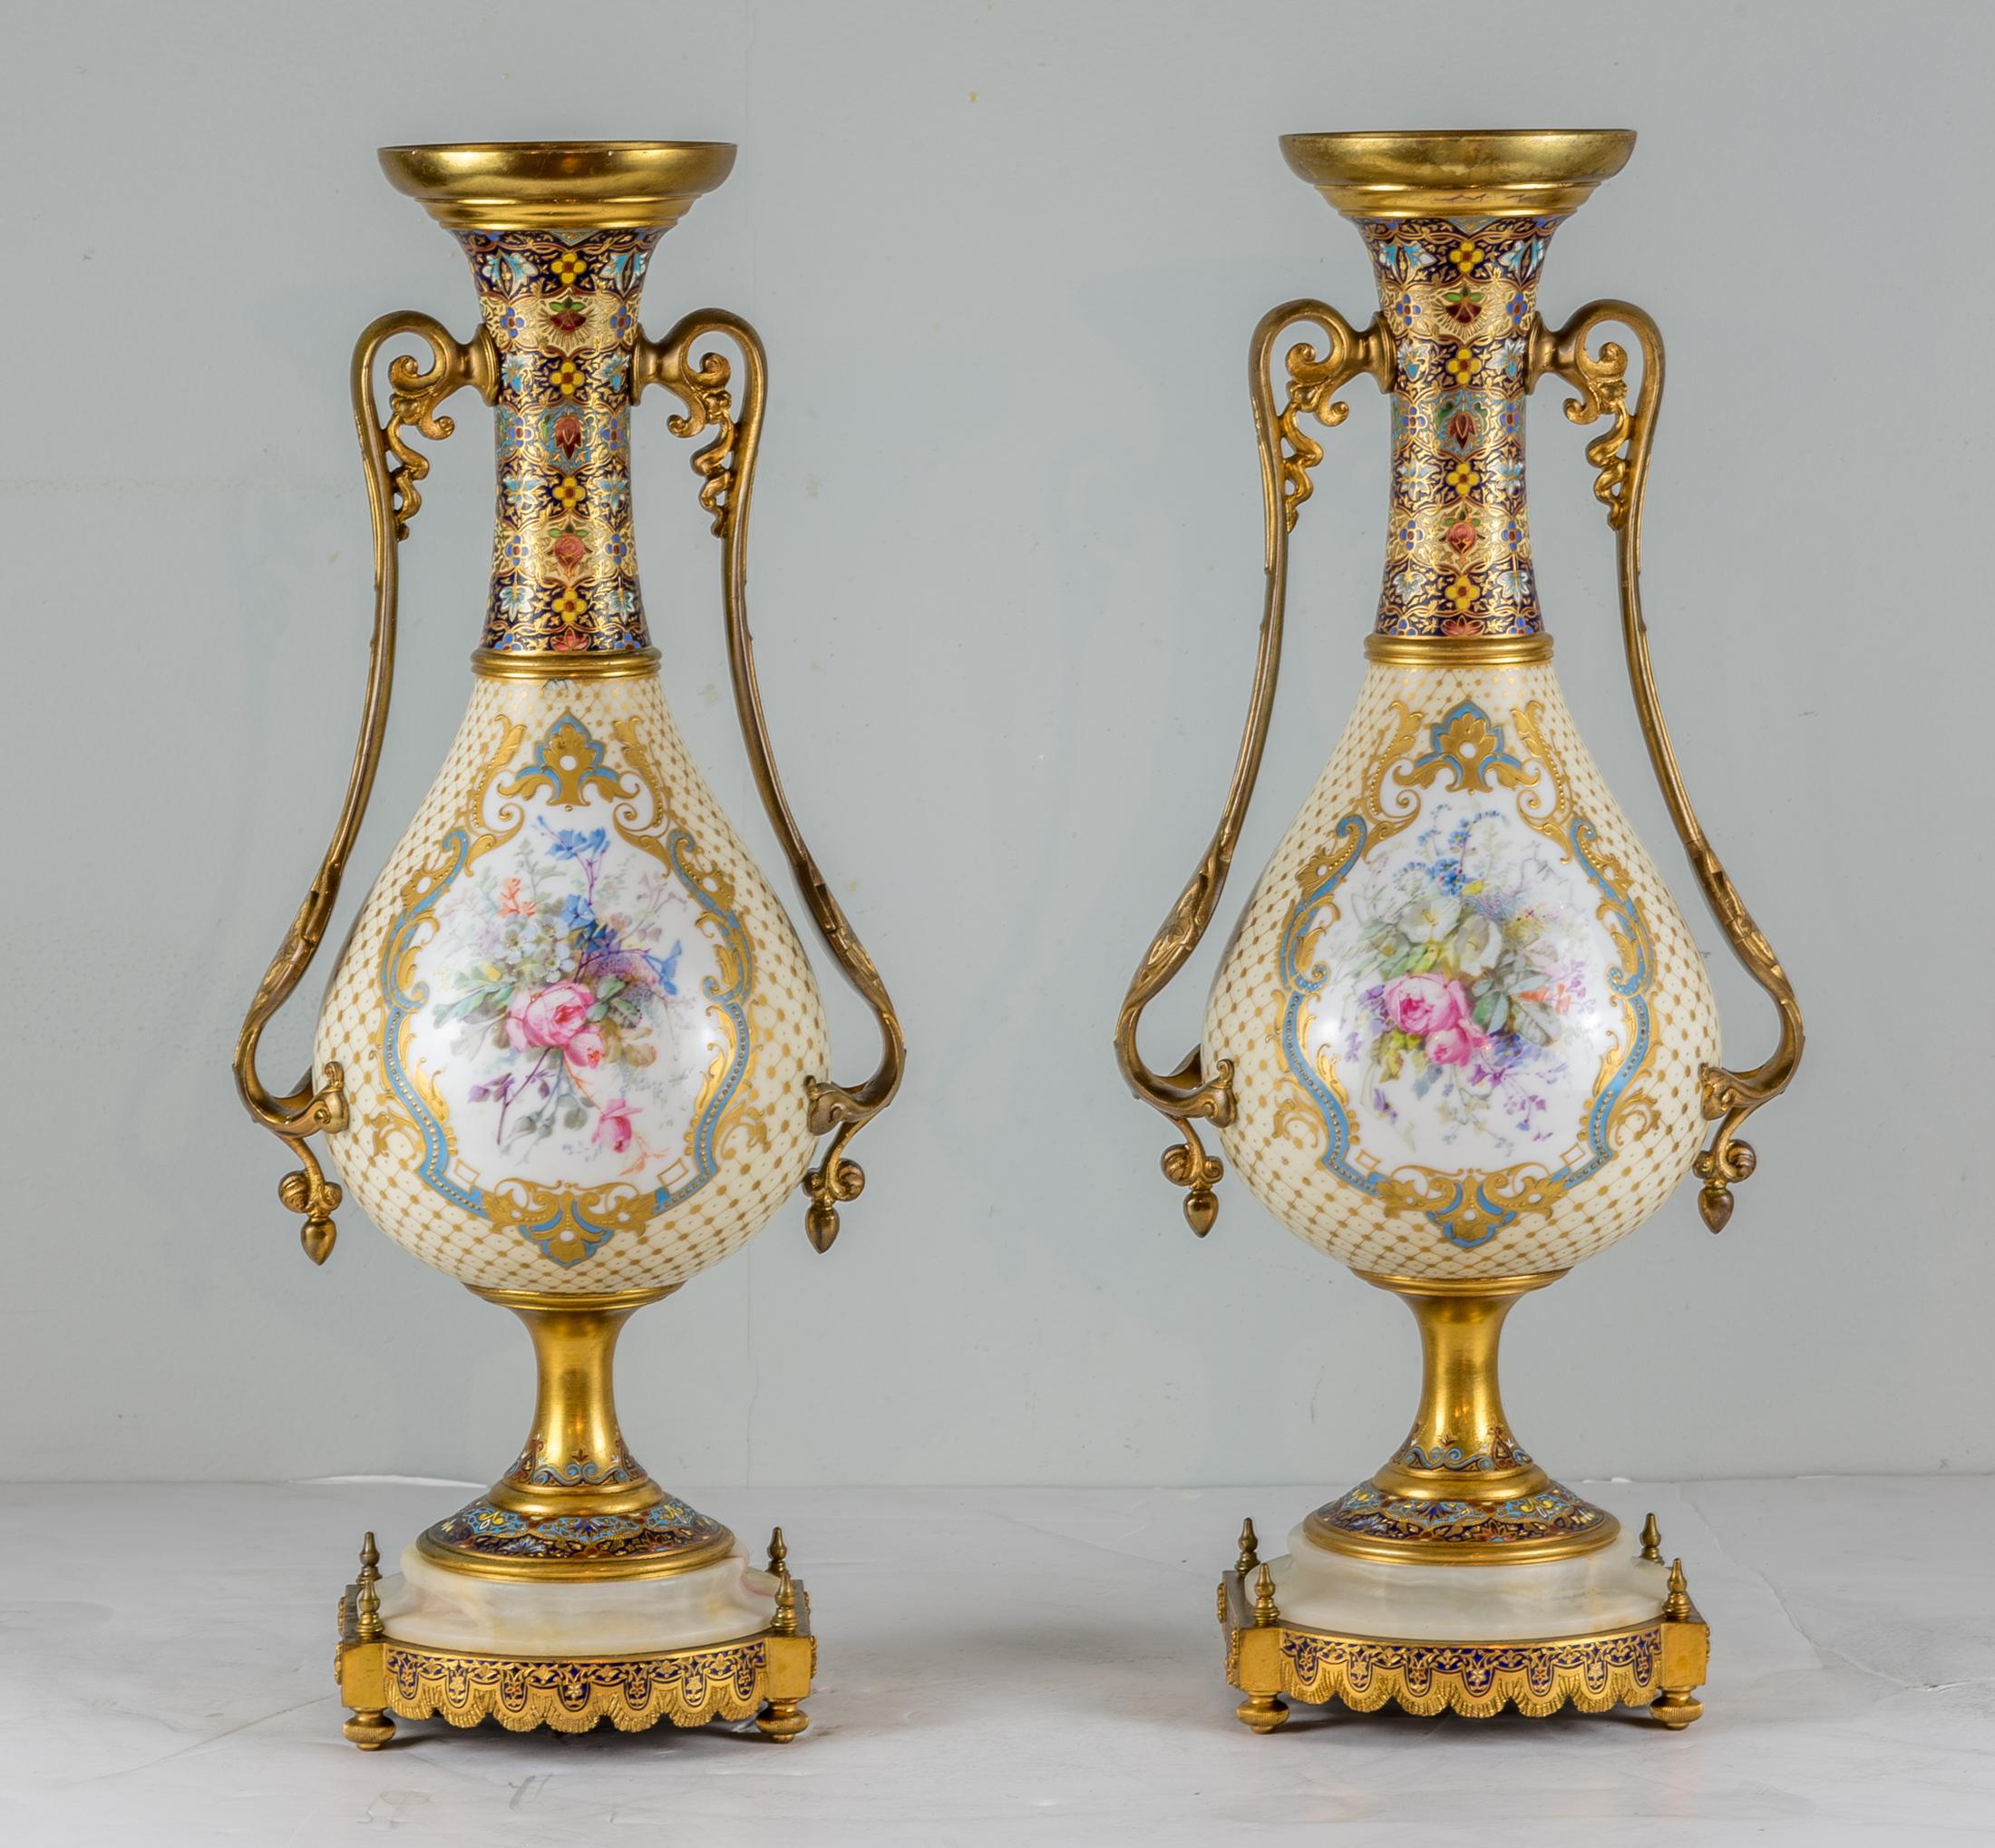 Pair of fine quality bronze-mounted Sèvres style porcelain champlevé enamel vases. The hand painted medallions depicting cherubs and floral motifs surrounded by raised gilt enamel. The porcelain body is mounted to a champlevé enamel and gilt bronze